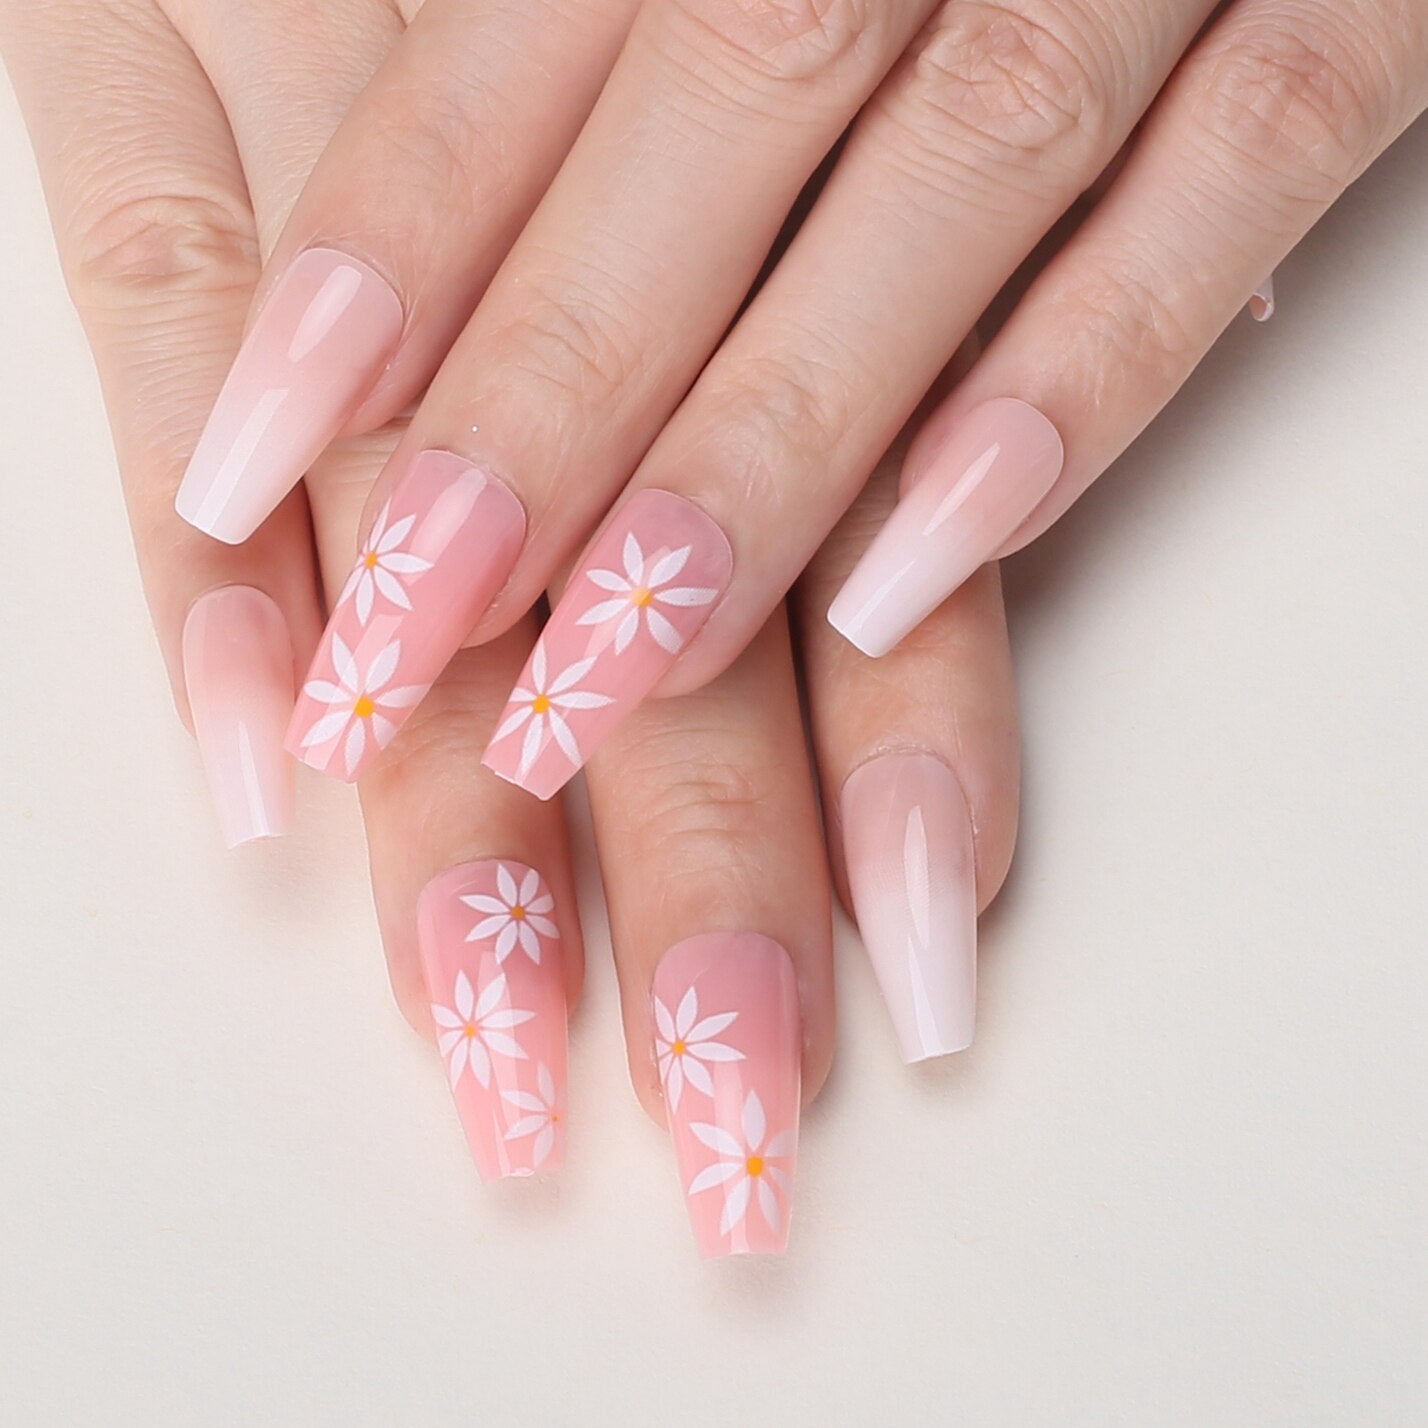 Faux Ongles Roses Motif Ballerine Longs Press On Nails